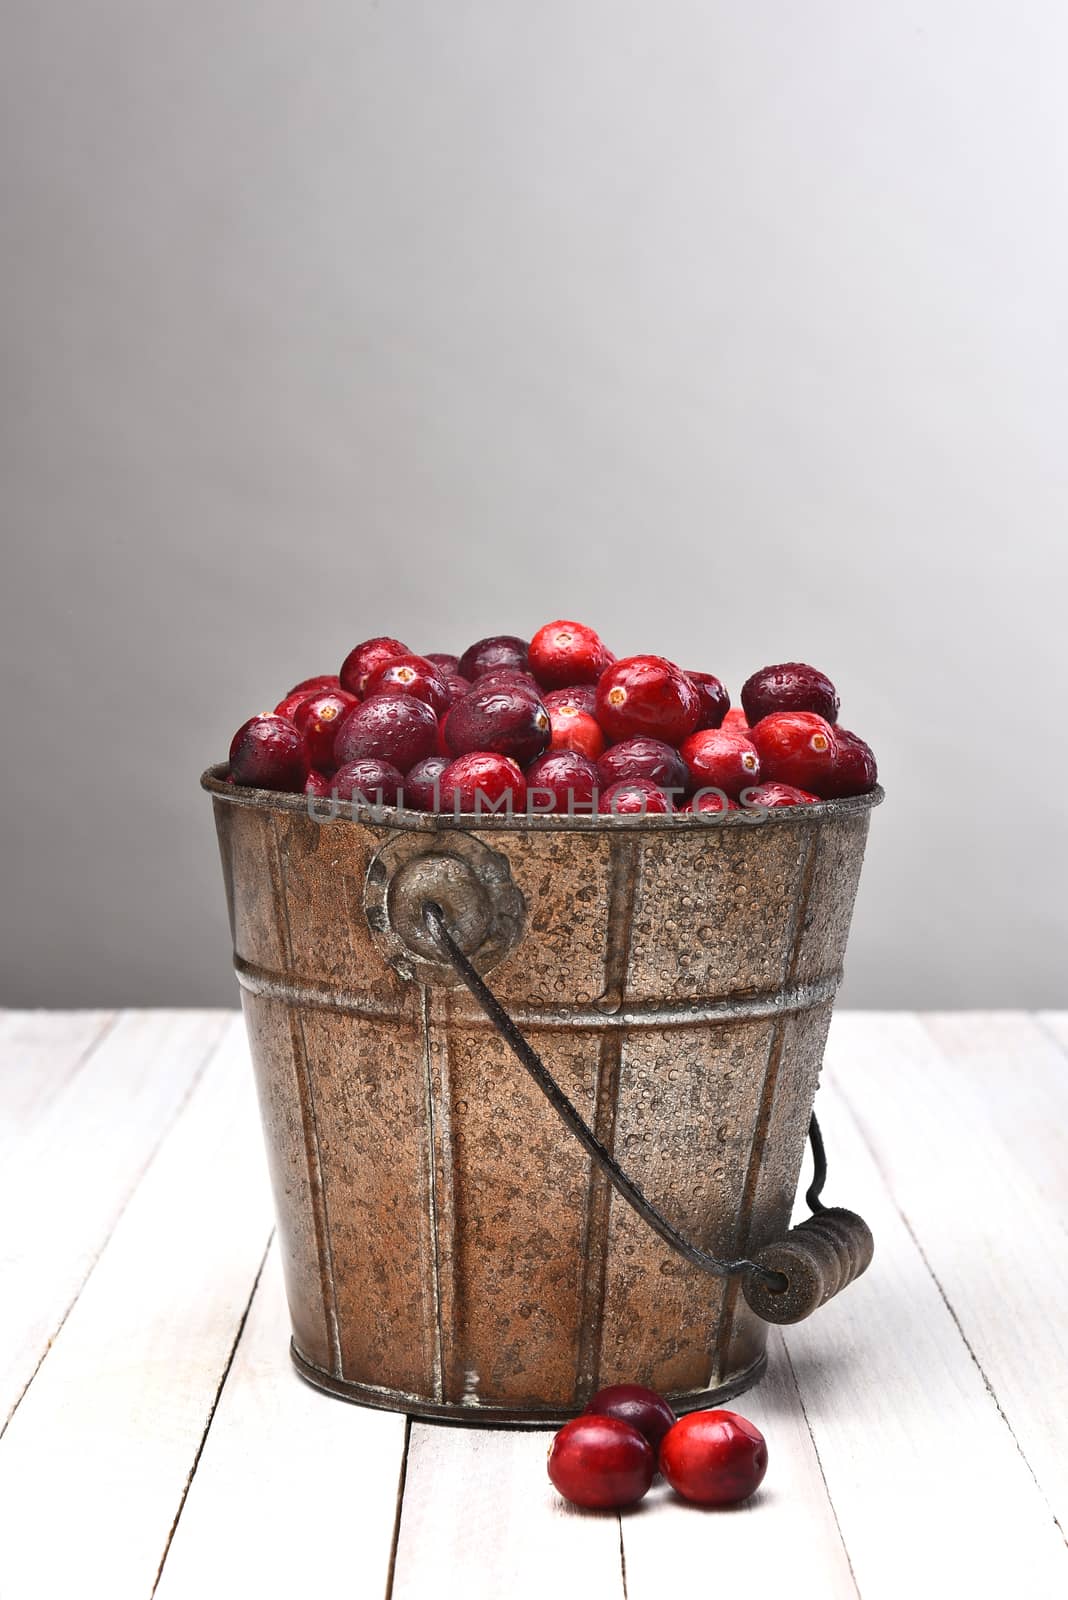 A bucket filled with fresh whole cranberries on a wood table against a light to dark gray background.